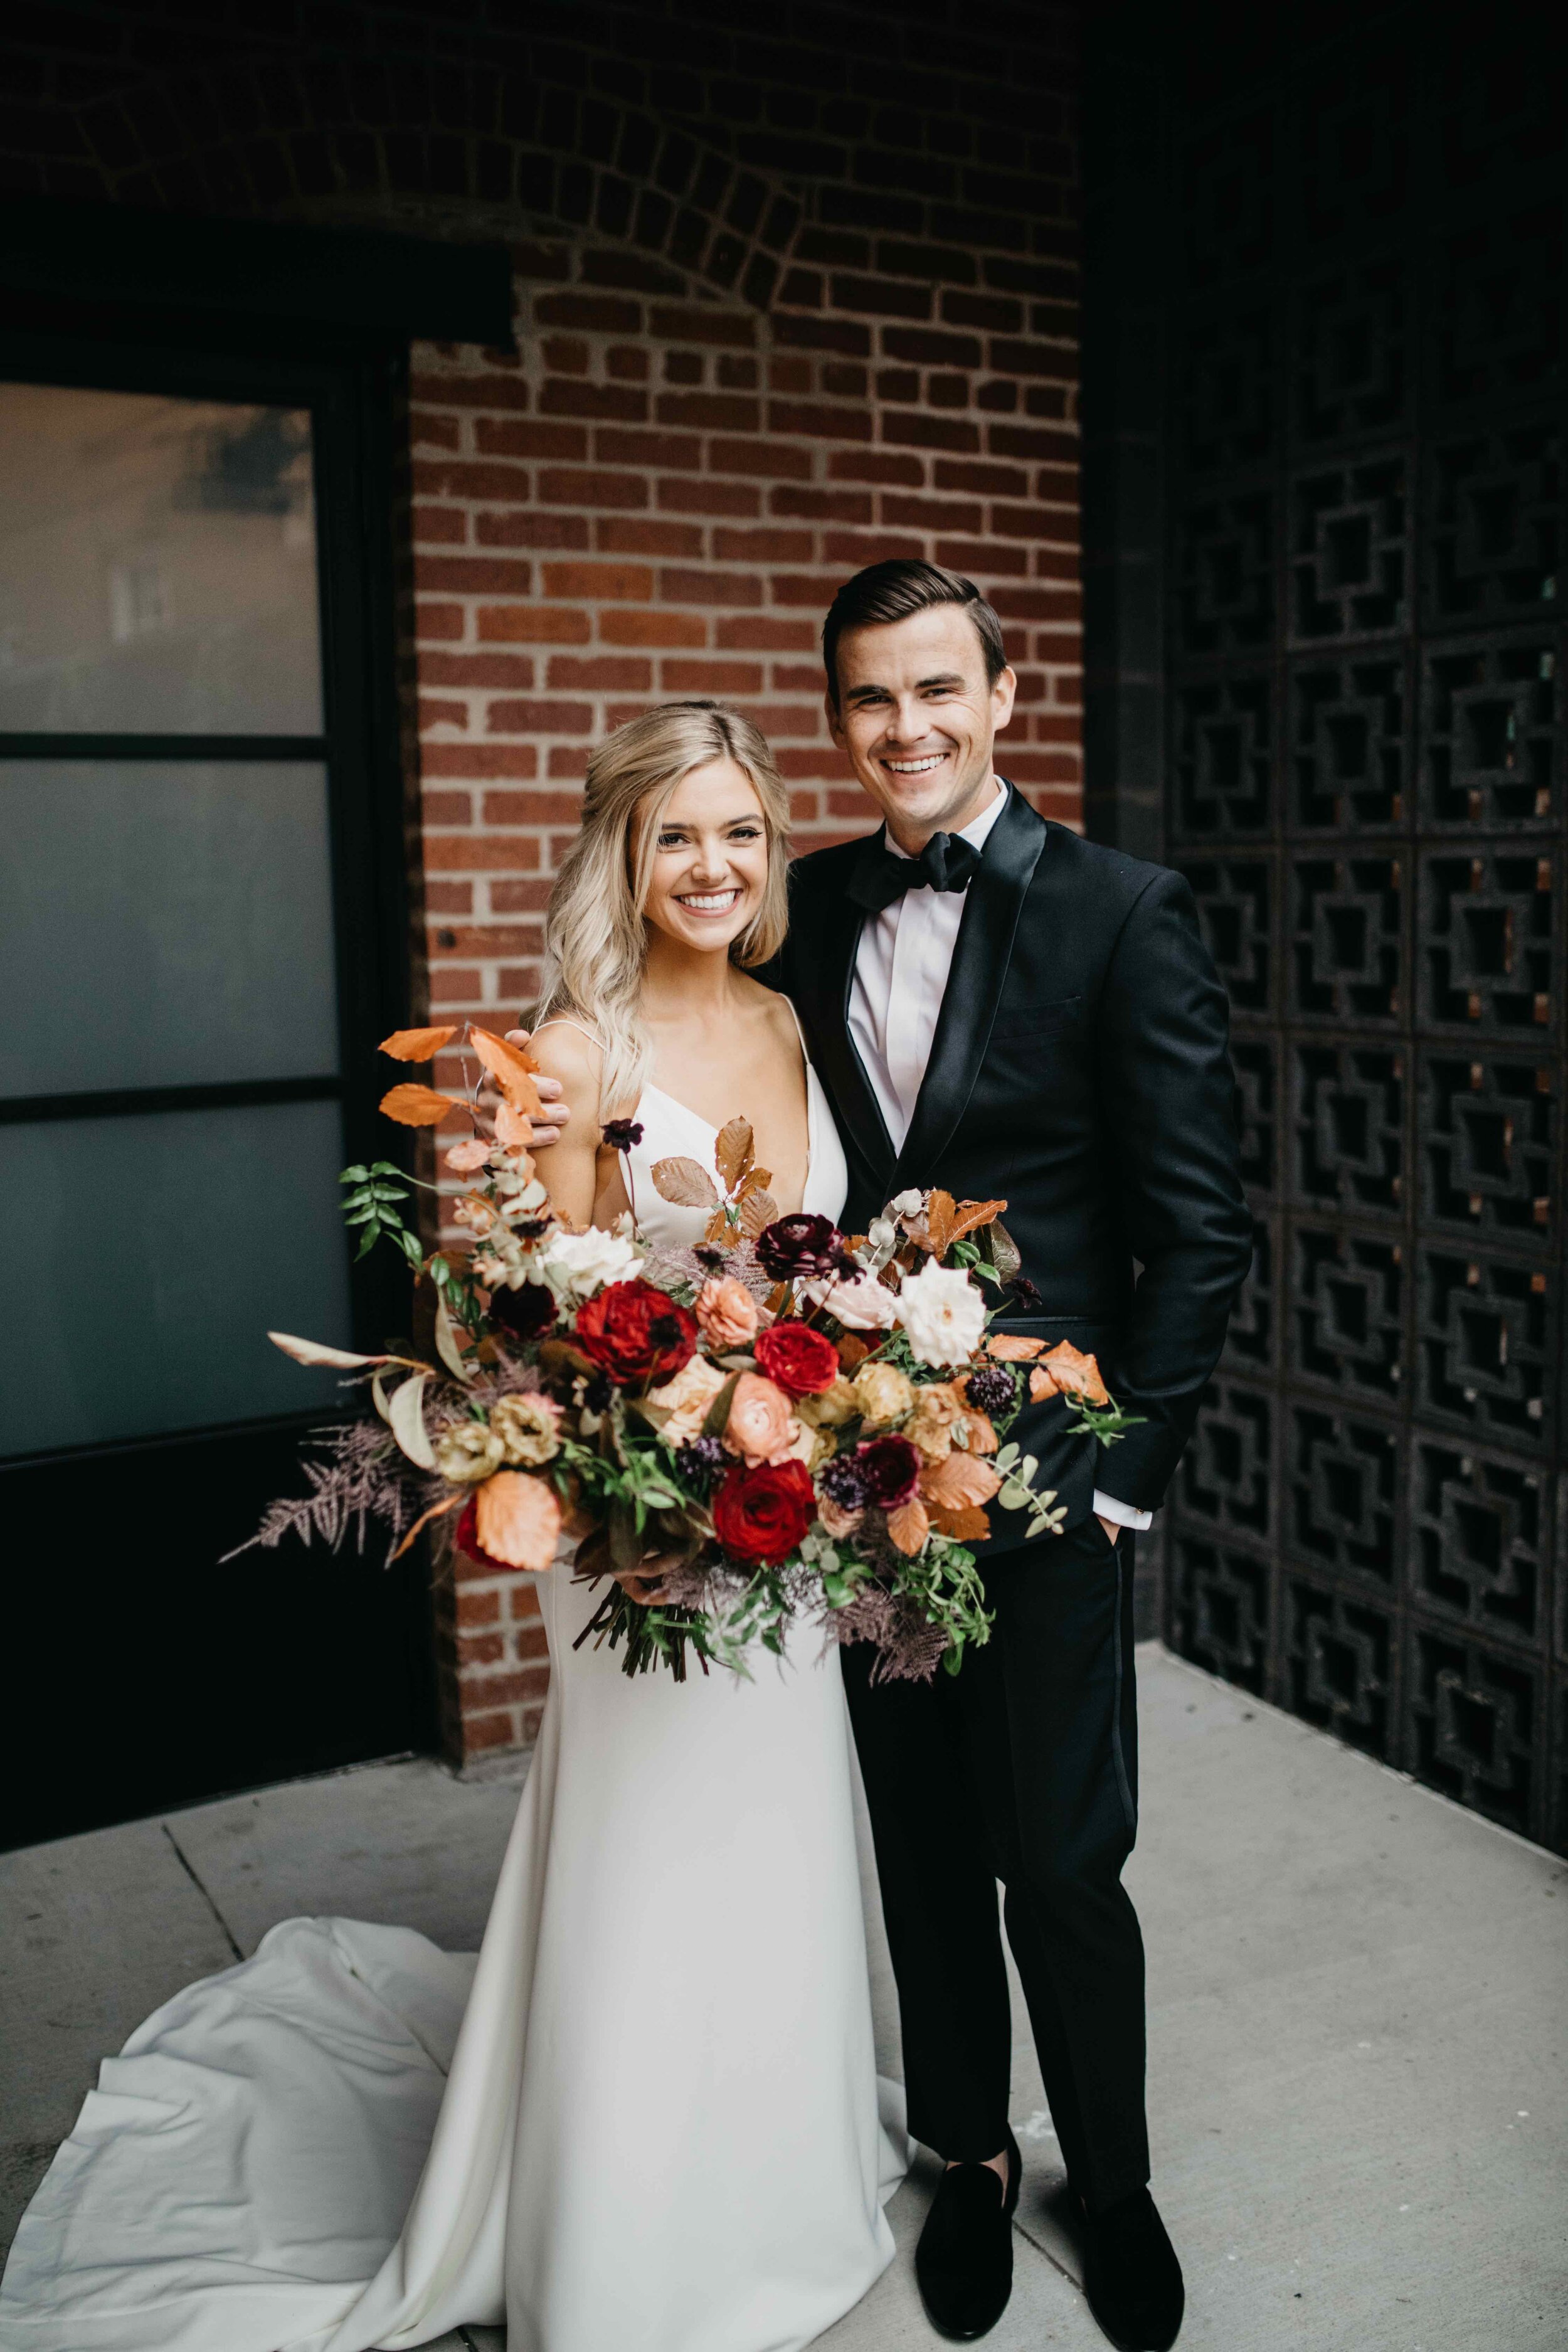 Garden inspired organic bridal bouquet in rich fall color palette using deep red garden roses, eggplant ranunculus, chocolate cosmos, copper beech, dusty rose ranunculus, and natural greenery. Luxury wedding florist in Nashville, TN.